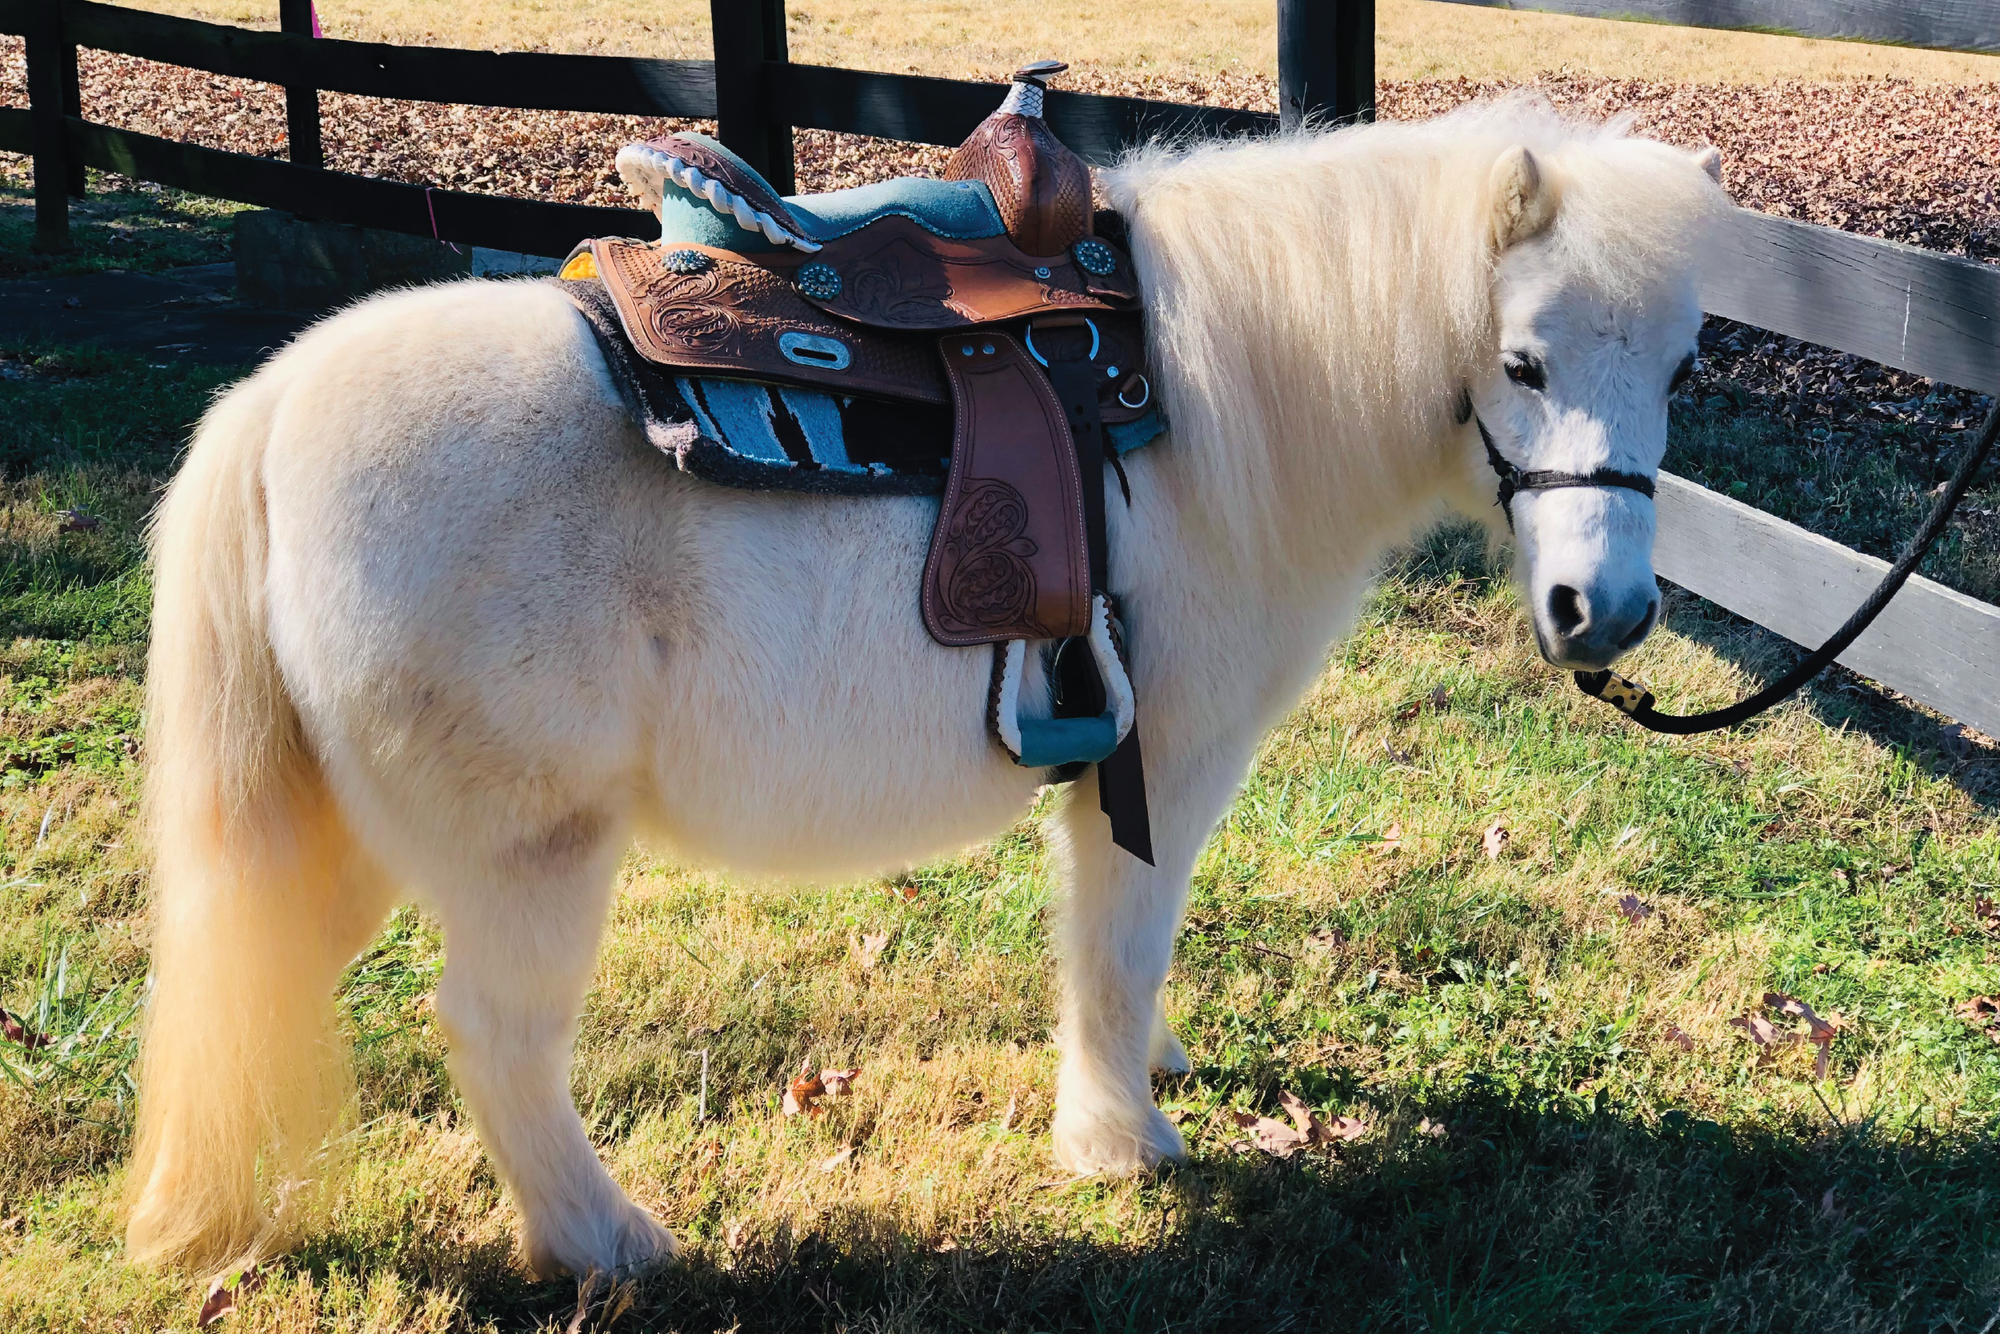 During the Mini Pony ride experience participants will learn to brush, tack up, and ride one of our mini ponies!